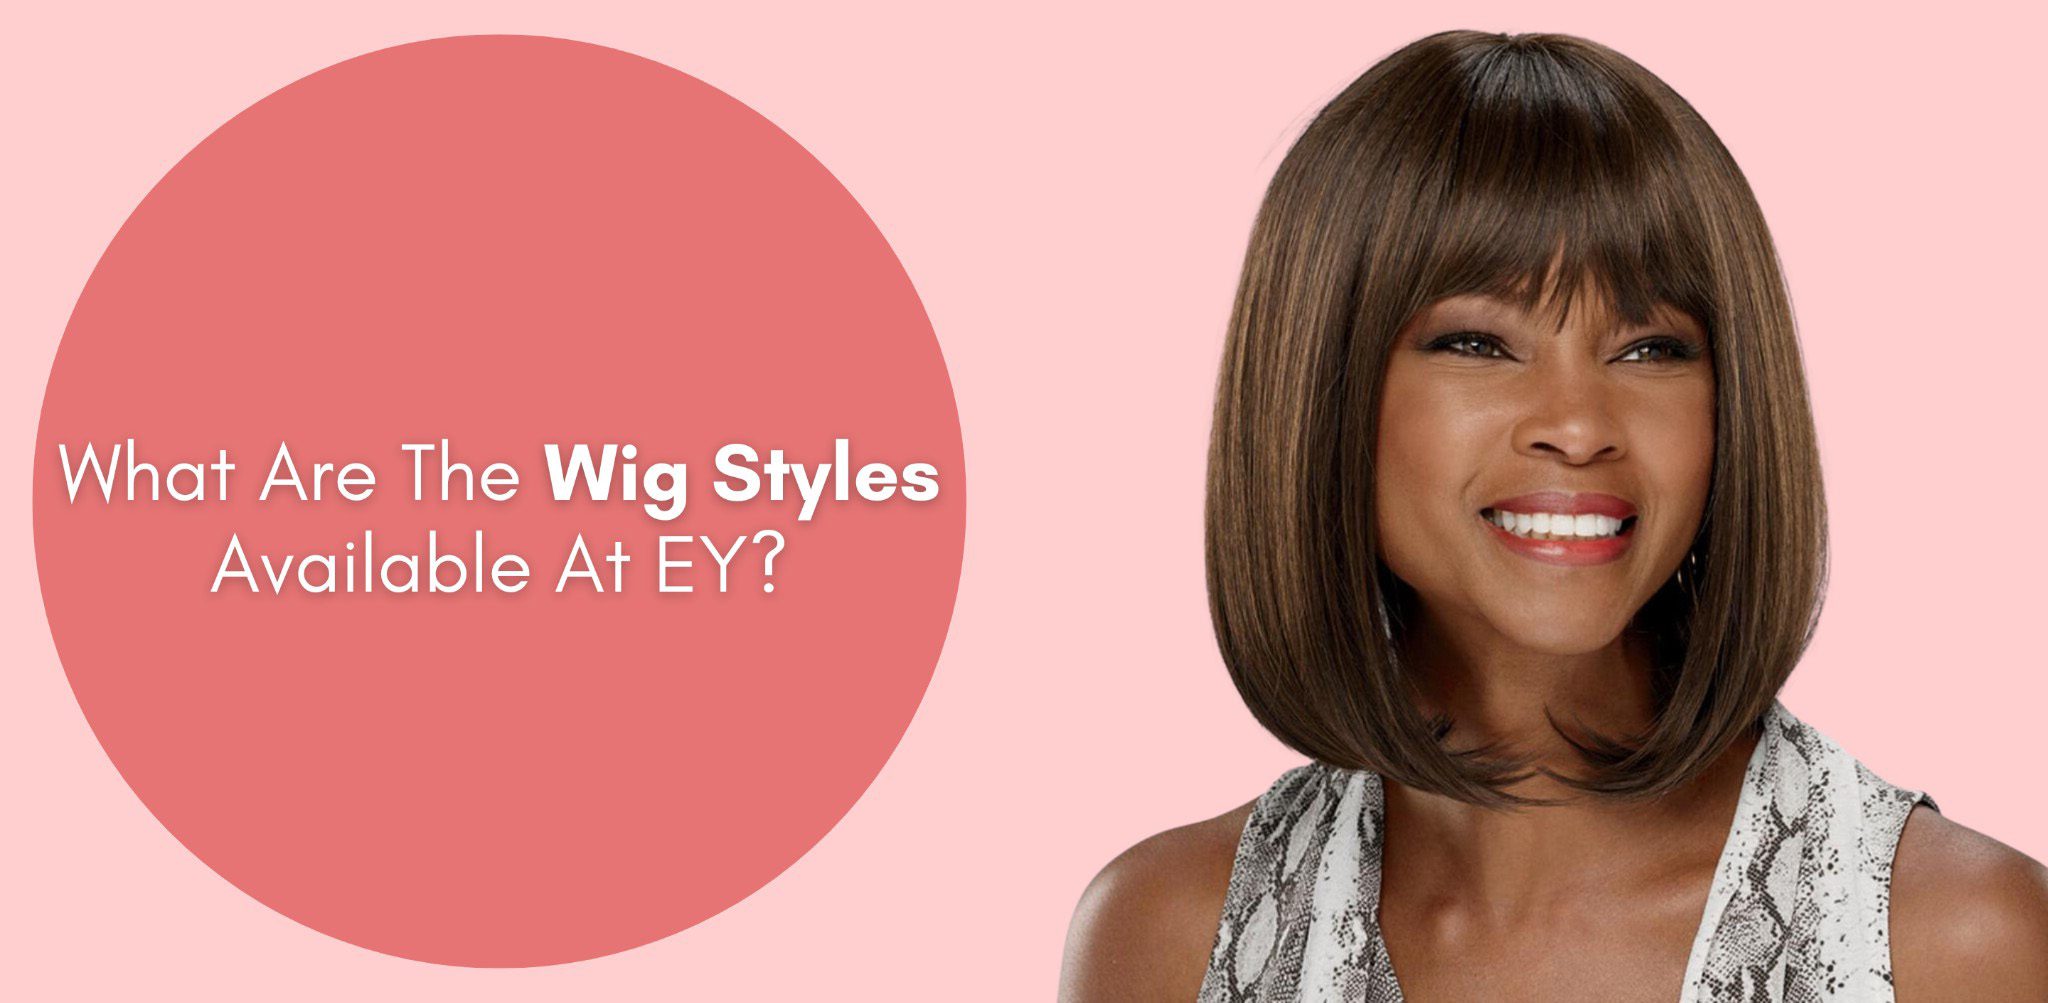 What Are The Wig Styles Available At EY?